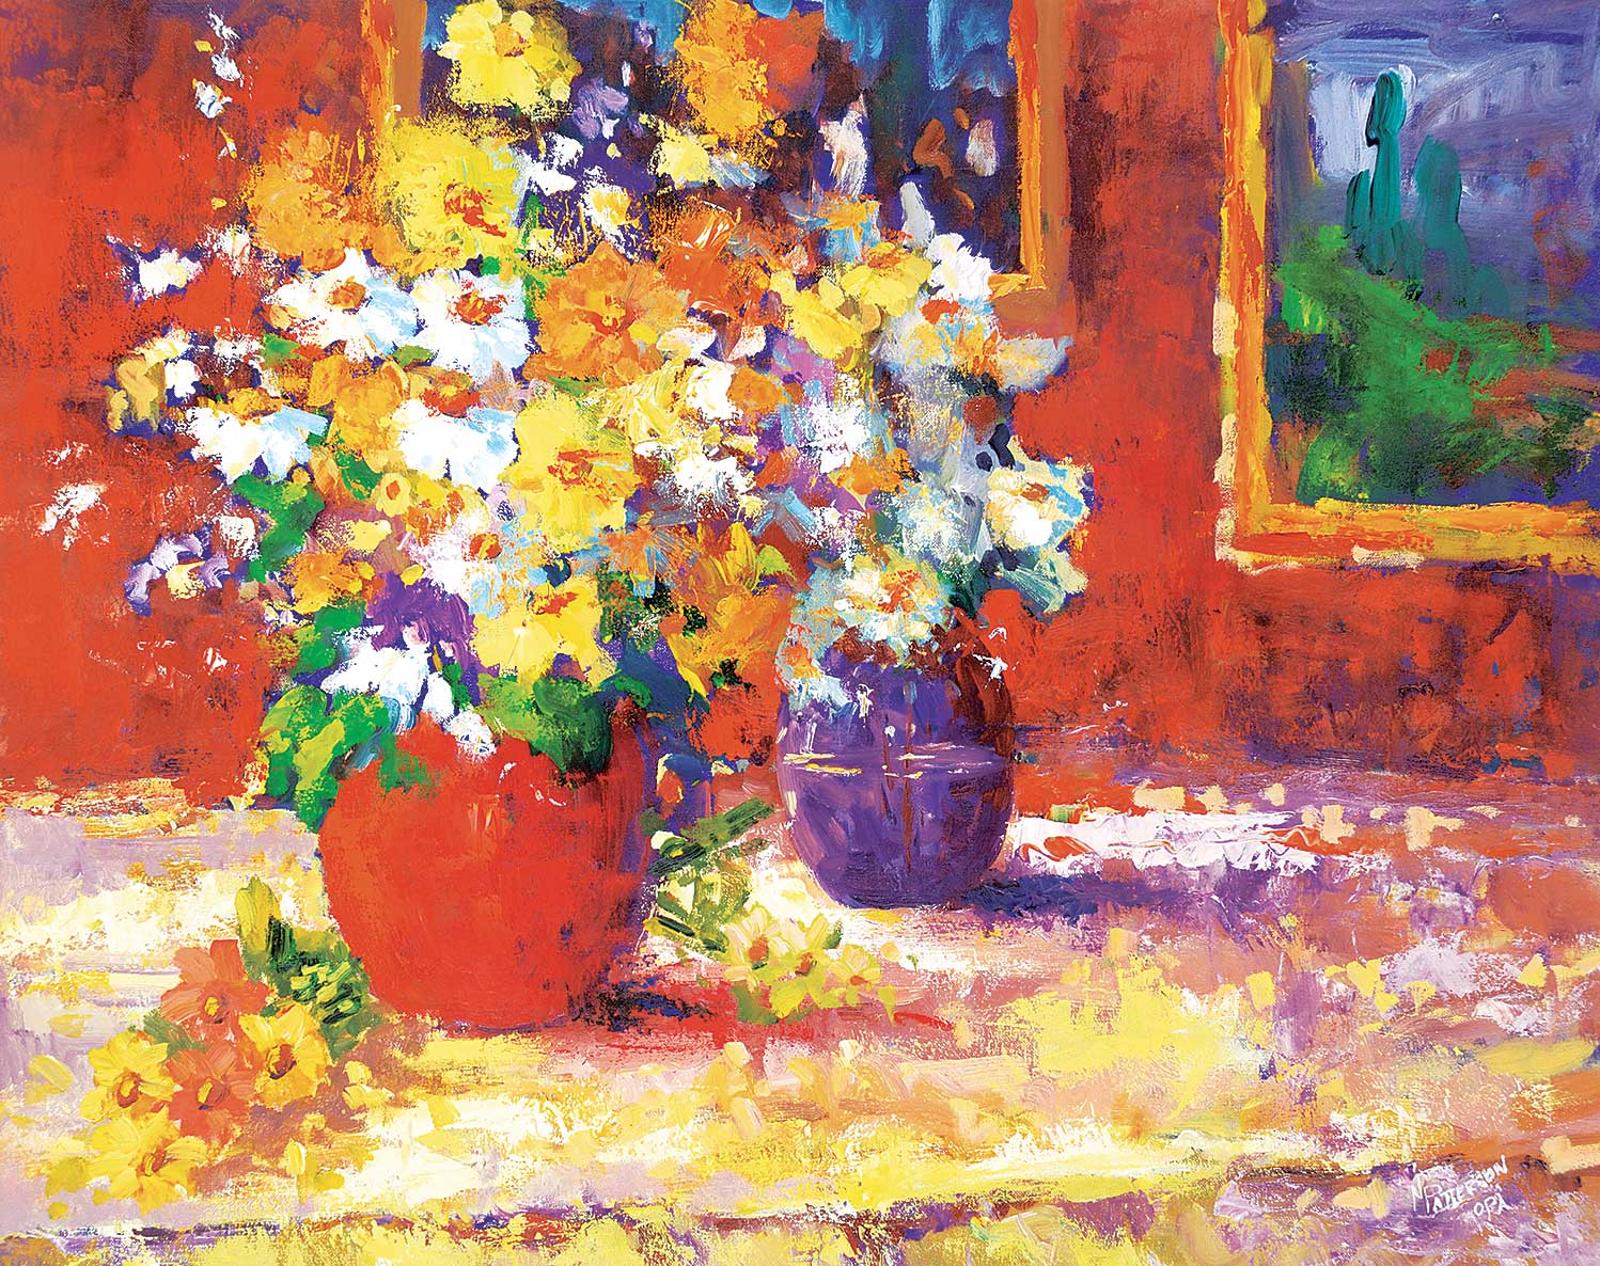 Neil Patterson (1947) - Vase Full of Daisies